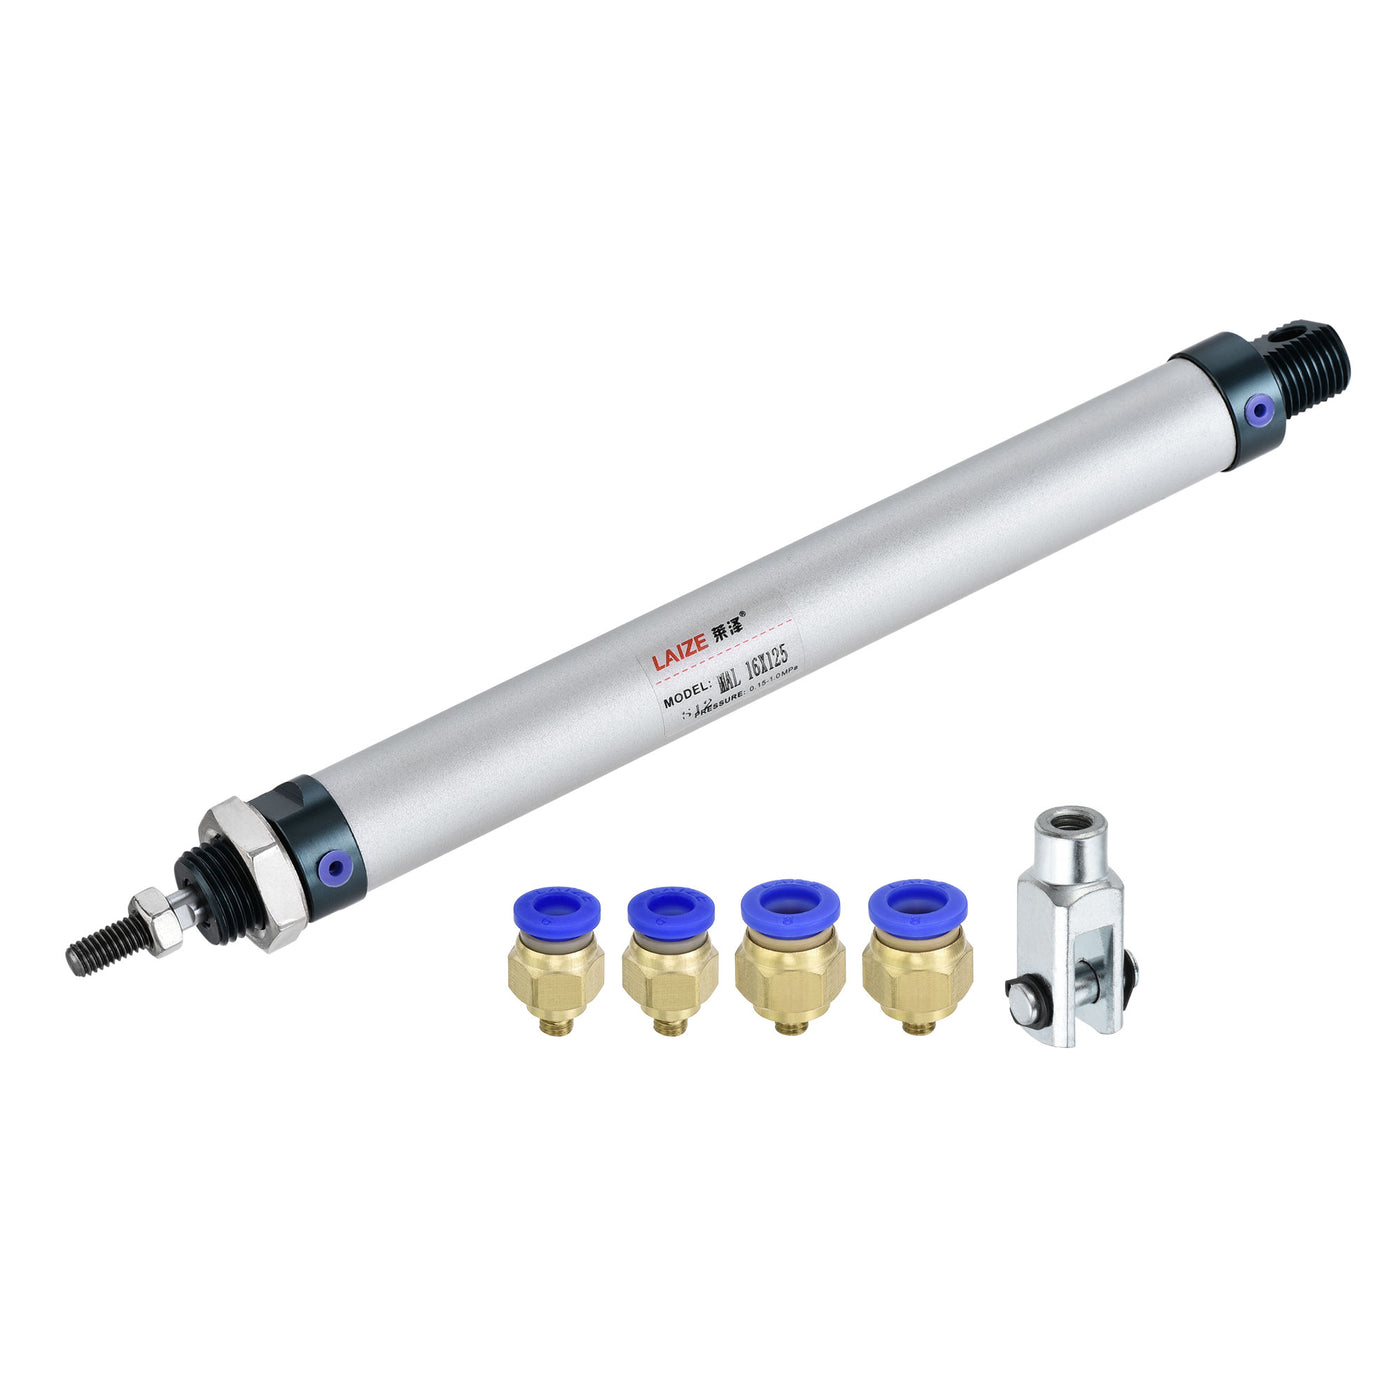 Uxcell Uxcell Pneumatic Air Cylinder 16mm Bore 75mm Stroke with Y Connector and Quick Fittings, MAL 16x75, for Automatic Equipment